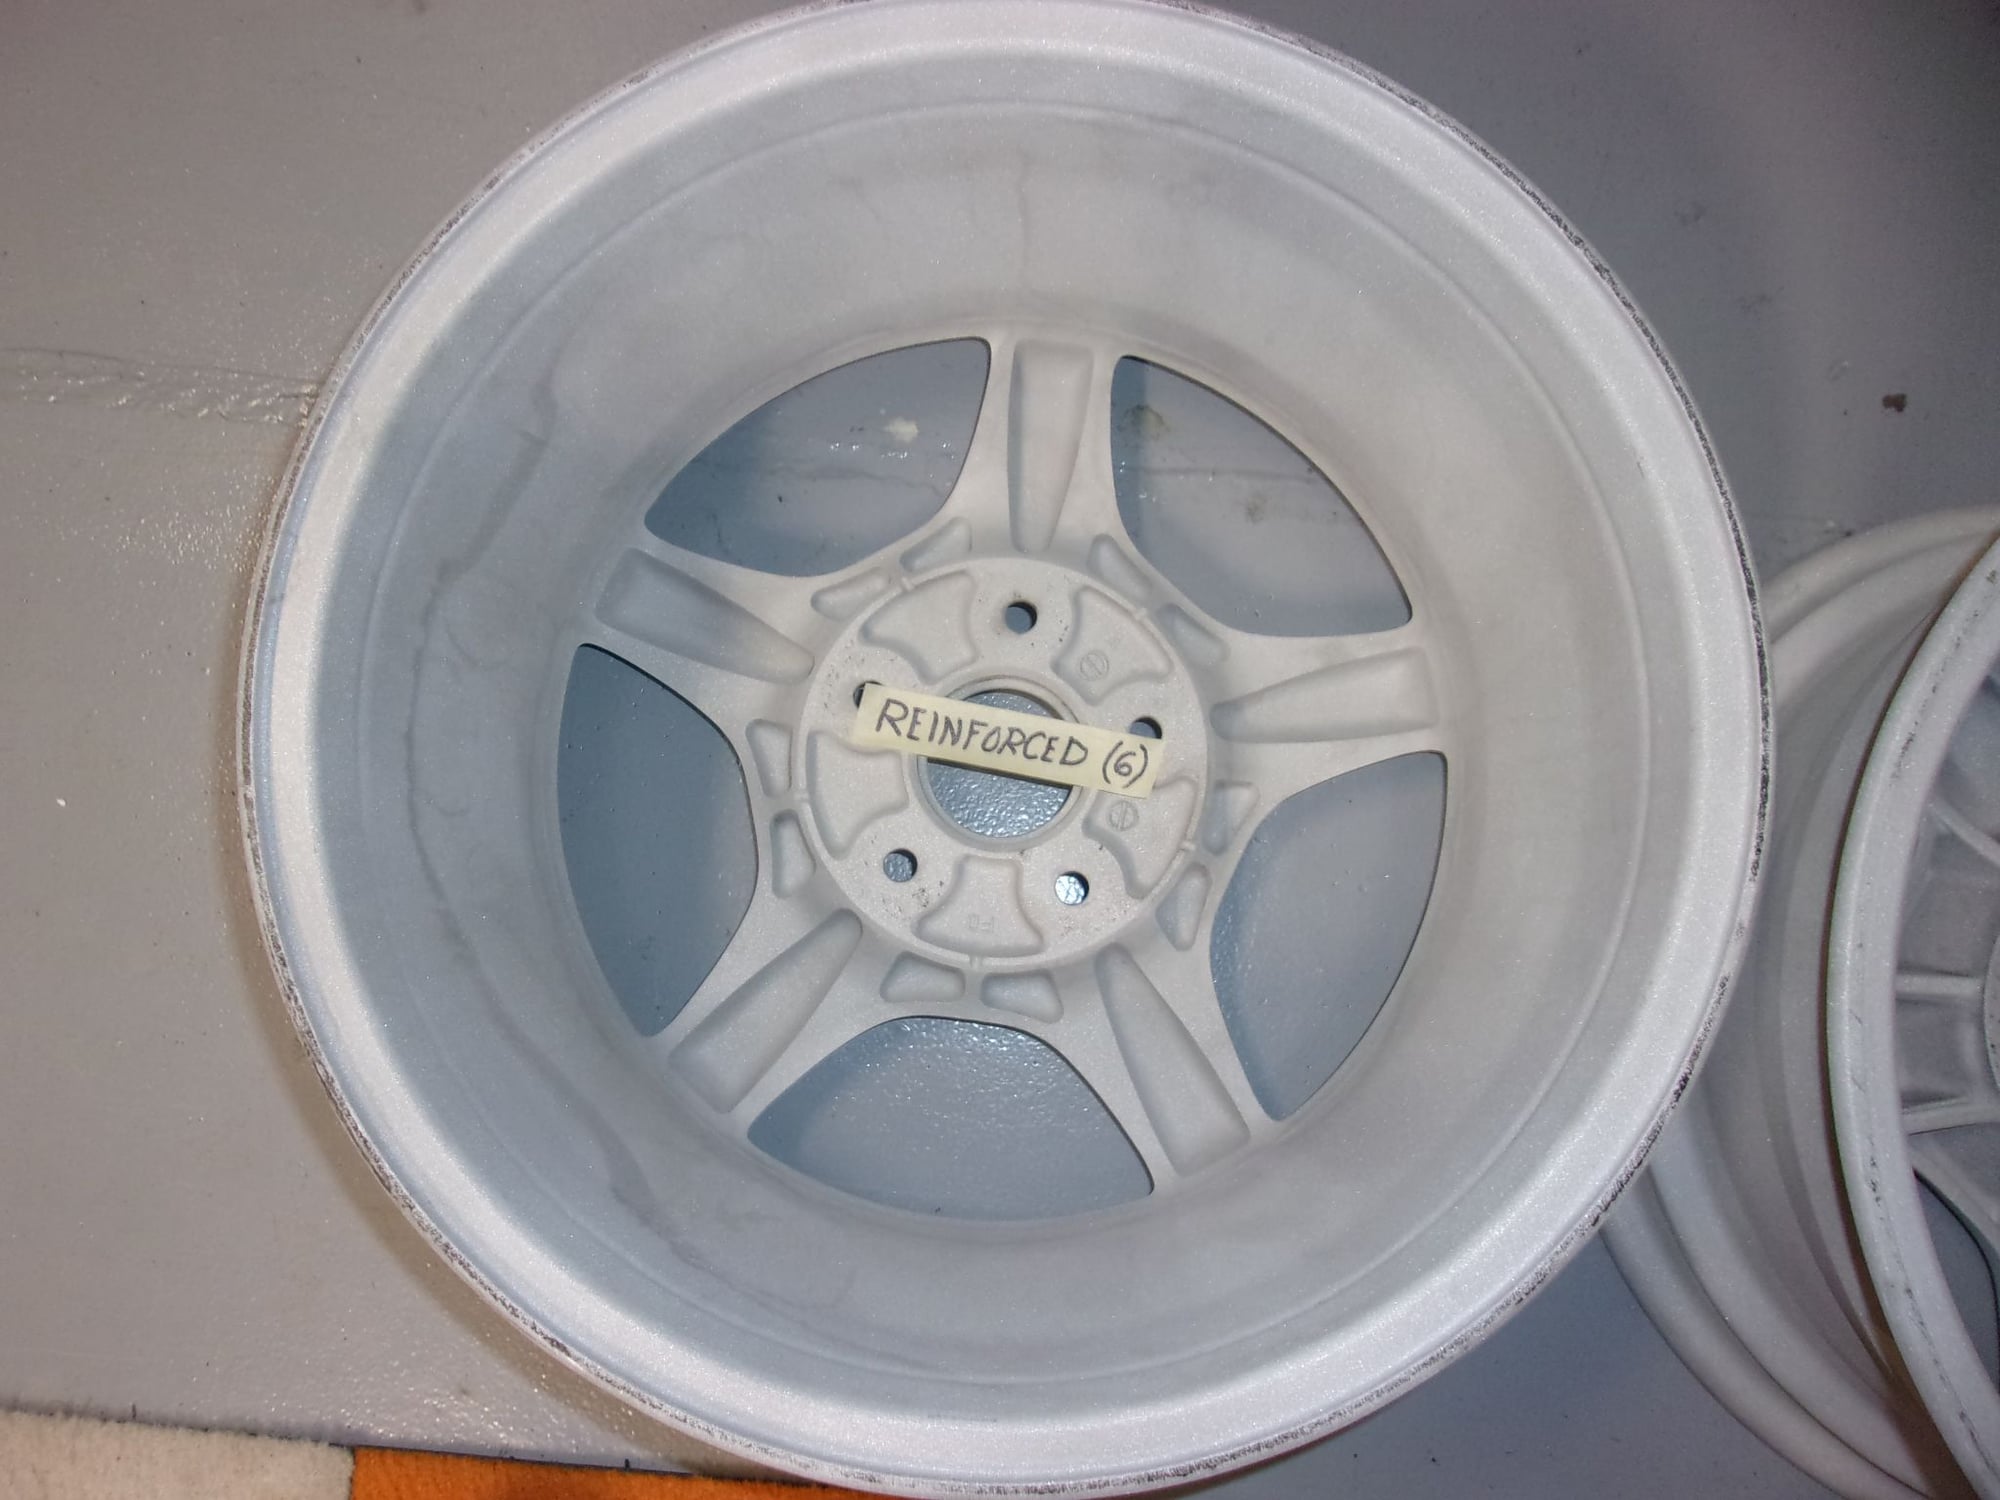 Wheels and Tires/Axles - OEM Wheels - Used - 1993 to 1994 Mazda RX-7 - Murfreesboro, TN 37130, United States